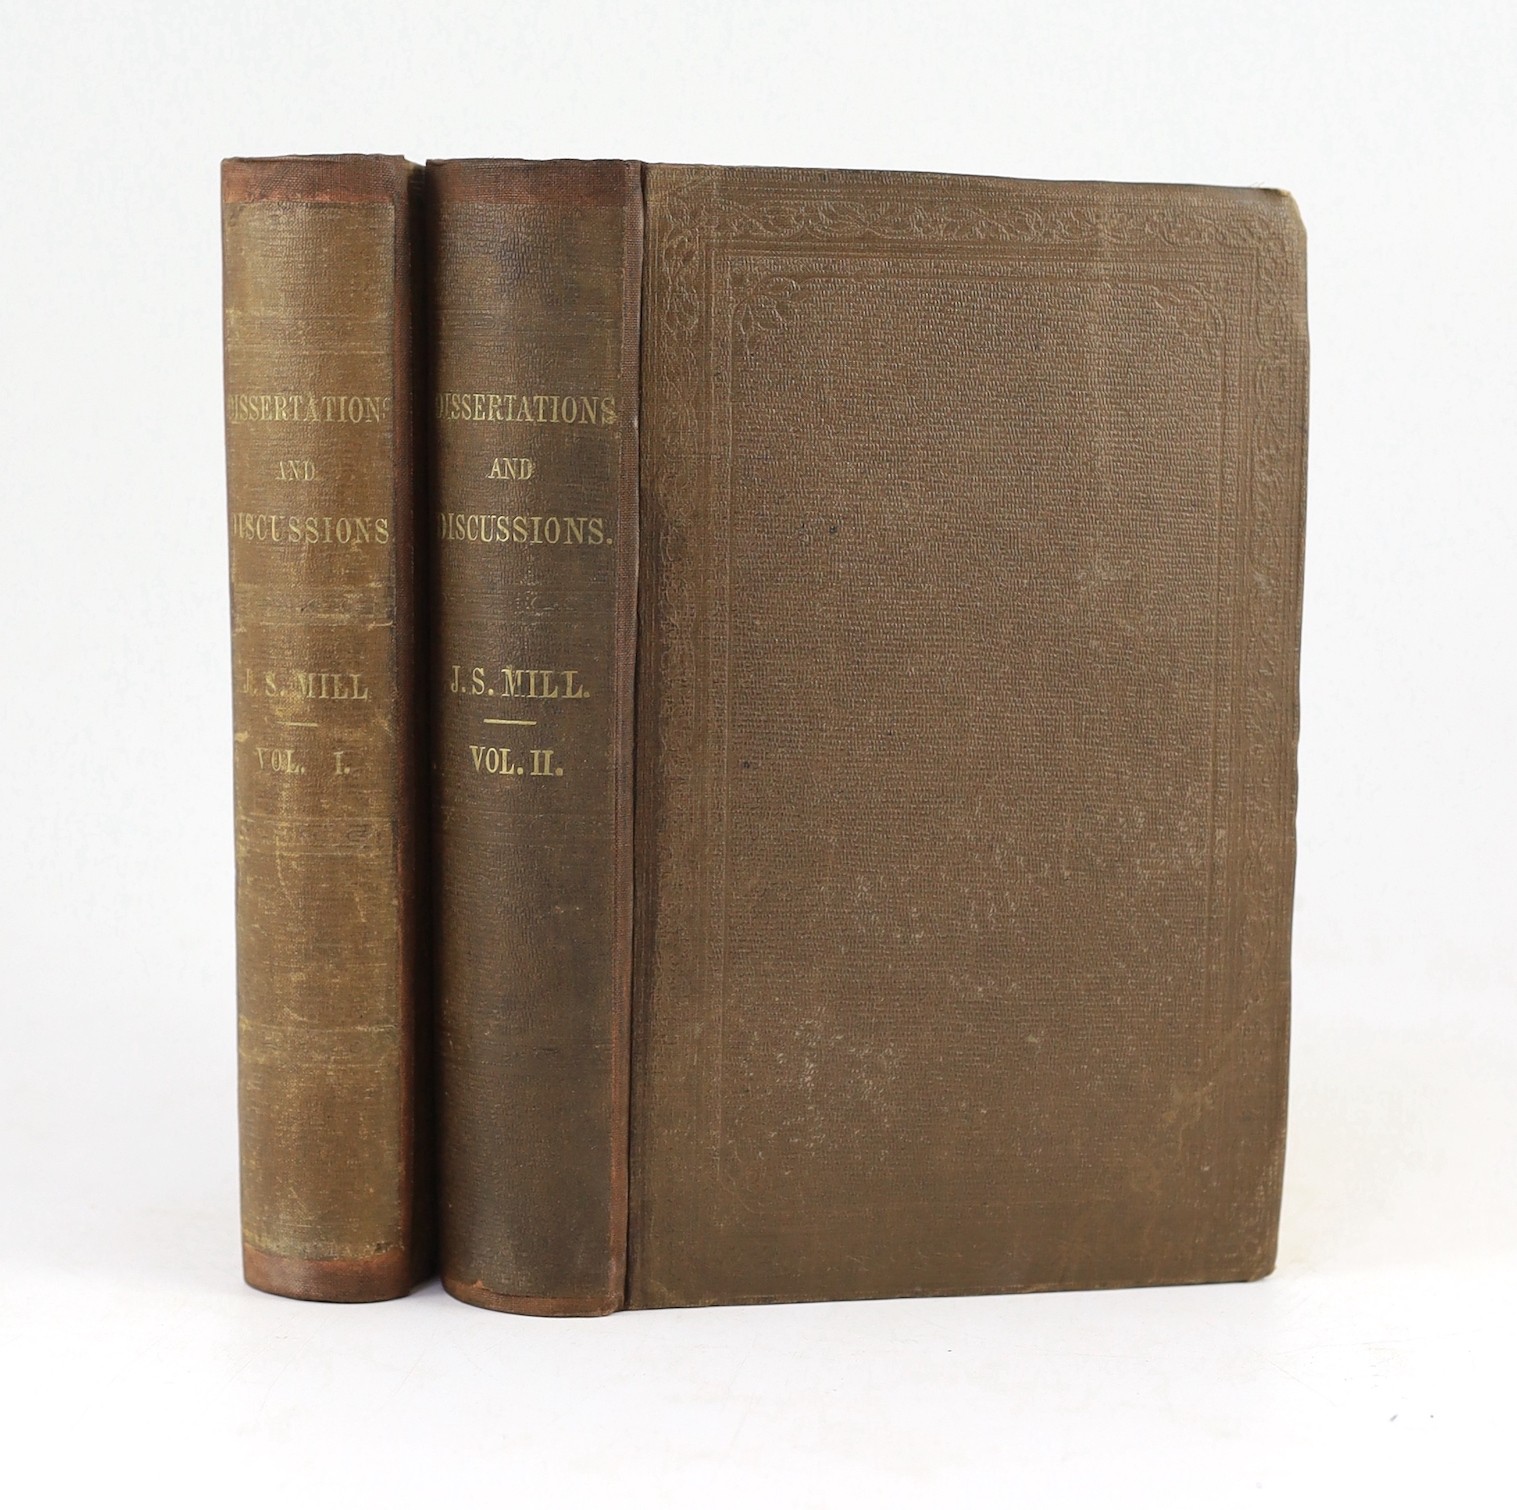 Mill, John Stuart - Dissertations and Discussions: political, philosophical, and historical... First Edition, 2 vols. original blind-decorated and gilt-lettered cloth. 1859